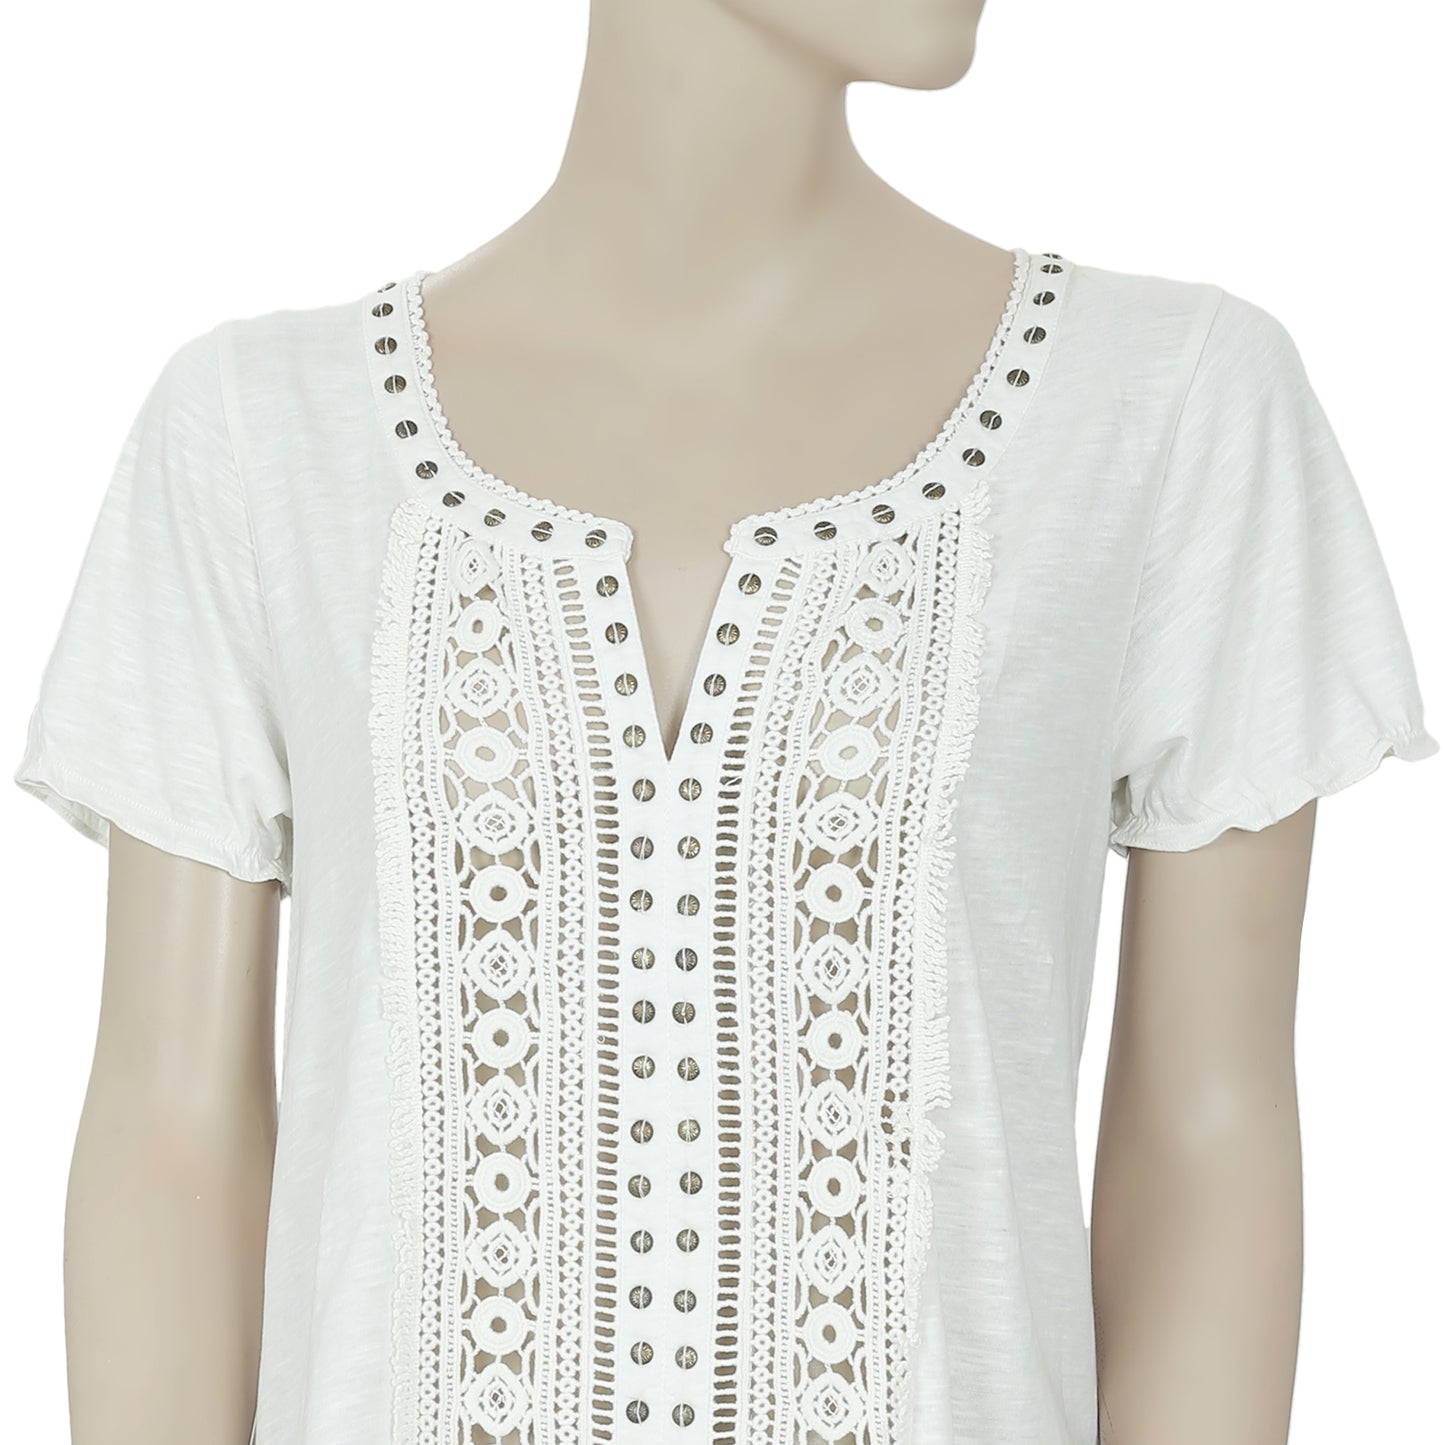 Odd Molly Crochet Embellished Ivory Blouse Top S